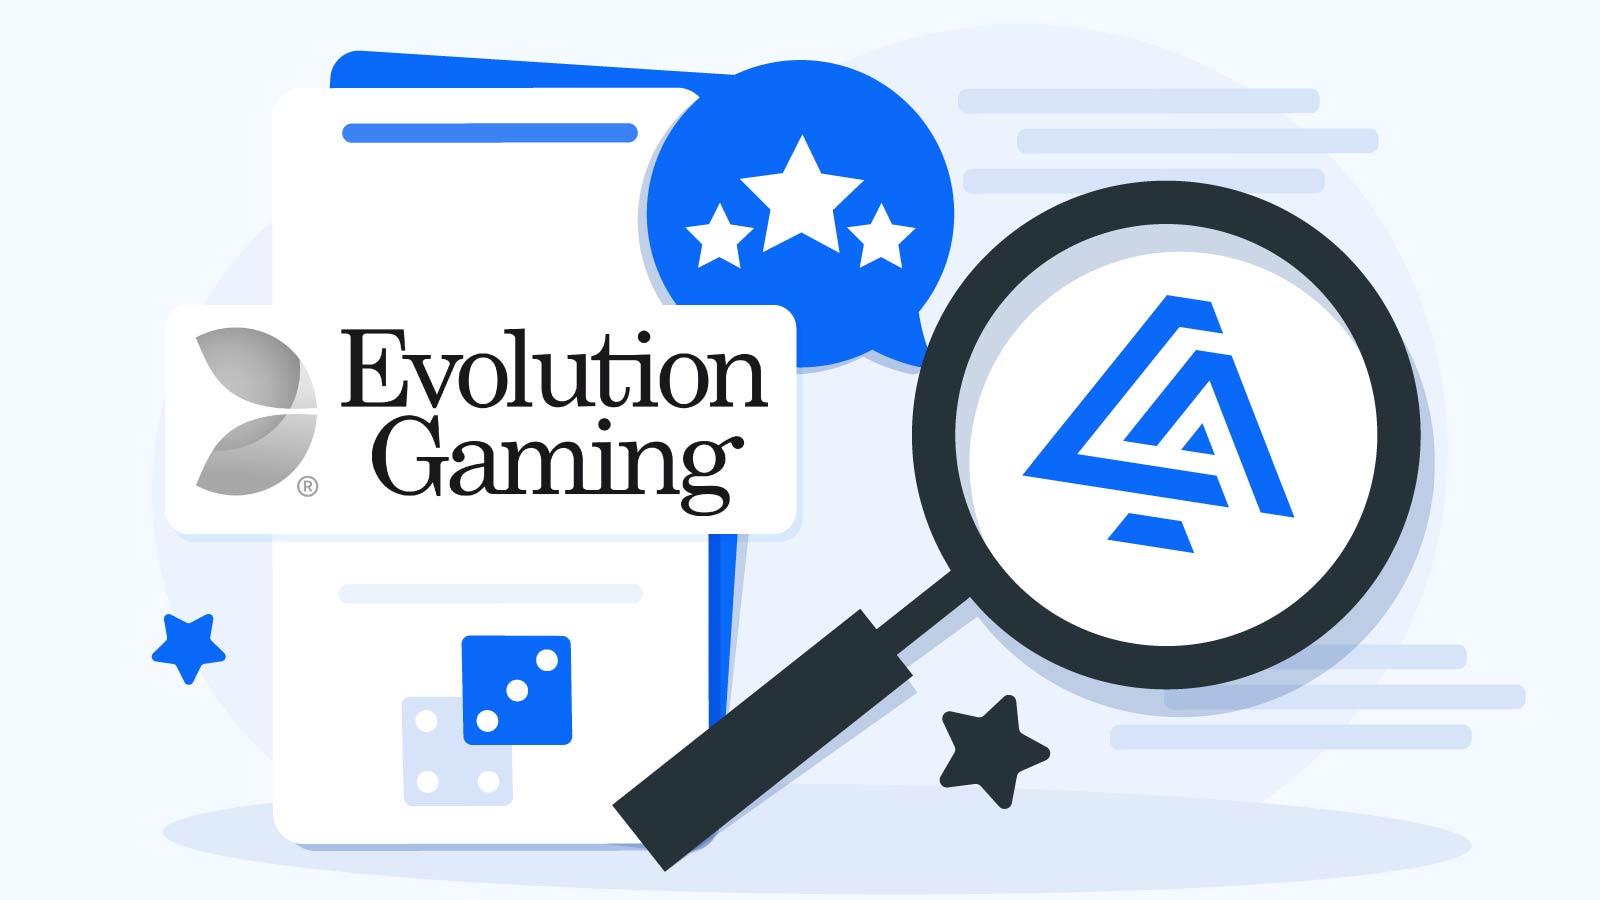 Features-All-CasinoAlpha-Approved-Evolution-Casinos-Must-Have